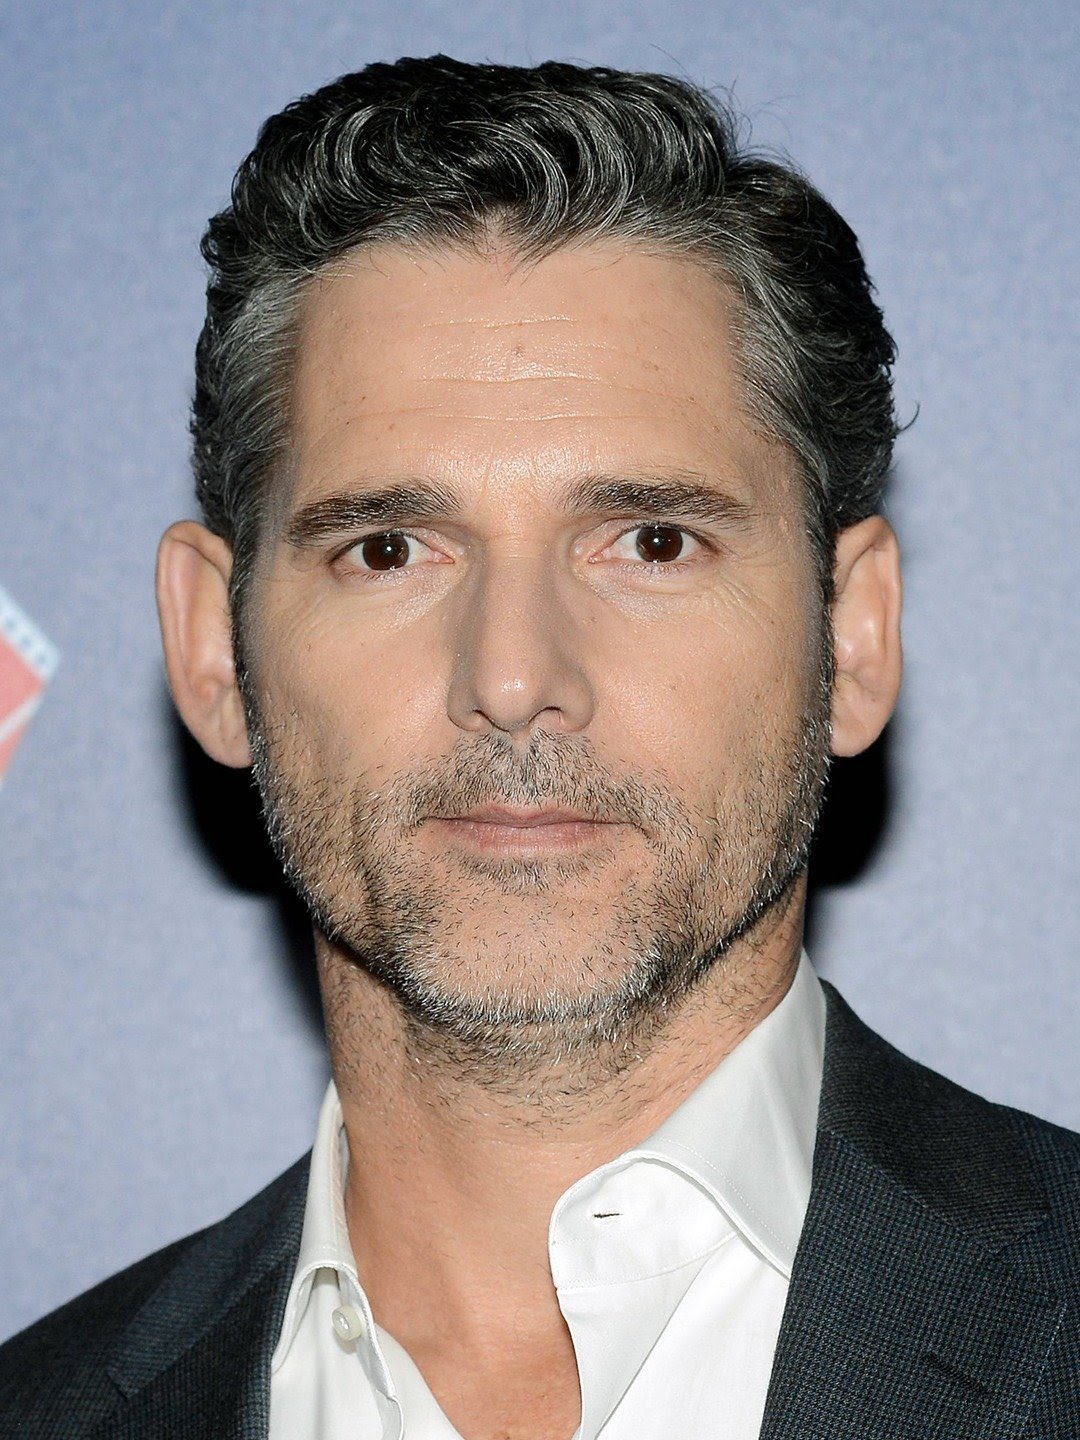 Happy Birthday to Eric Bana! My personal favorite actor to take on the role of Bruce Banner, aka The Hulk! 